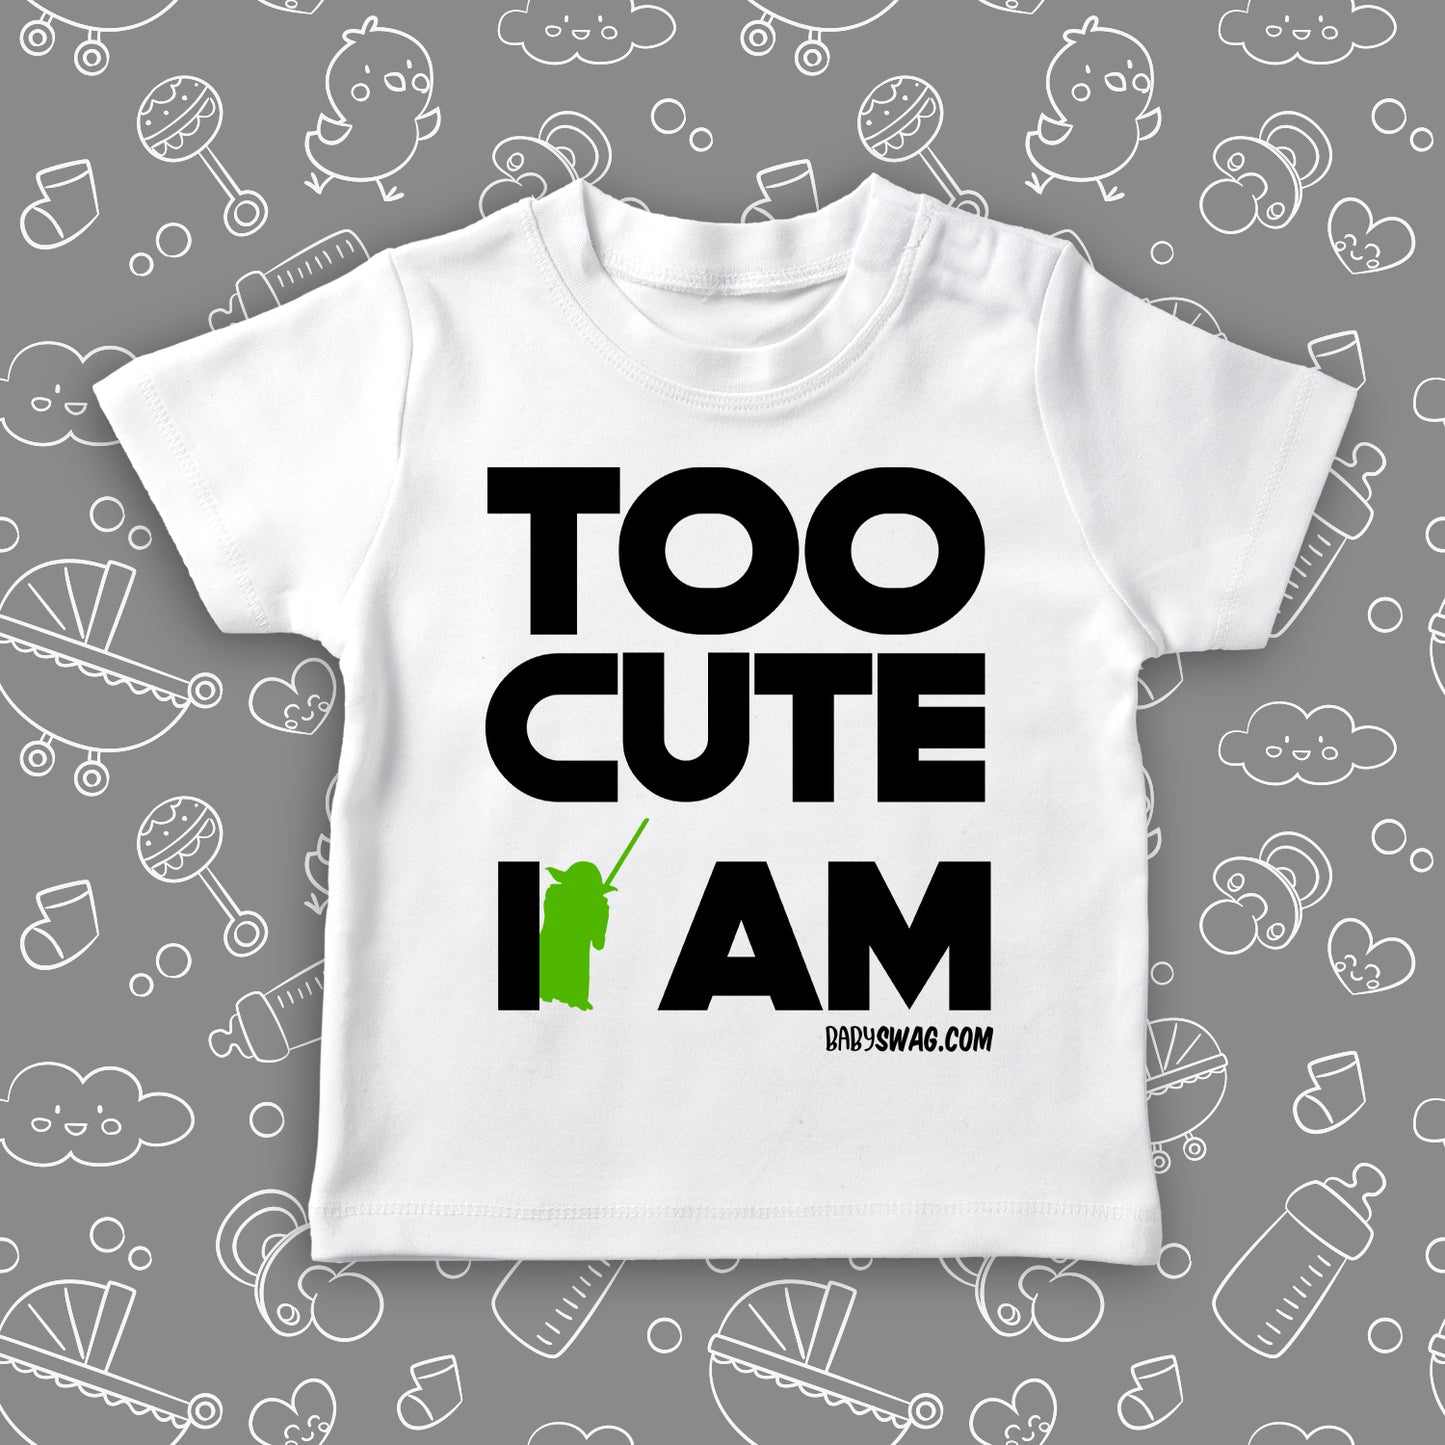 Cute toddler shirts with saying "Too Cute I Am"  in white.